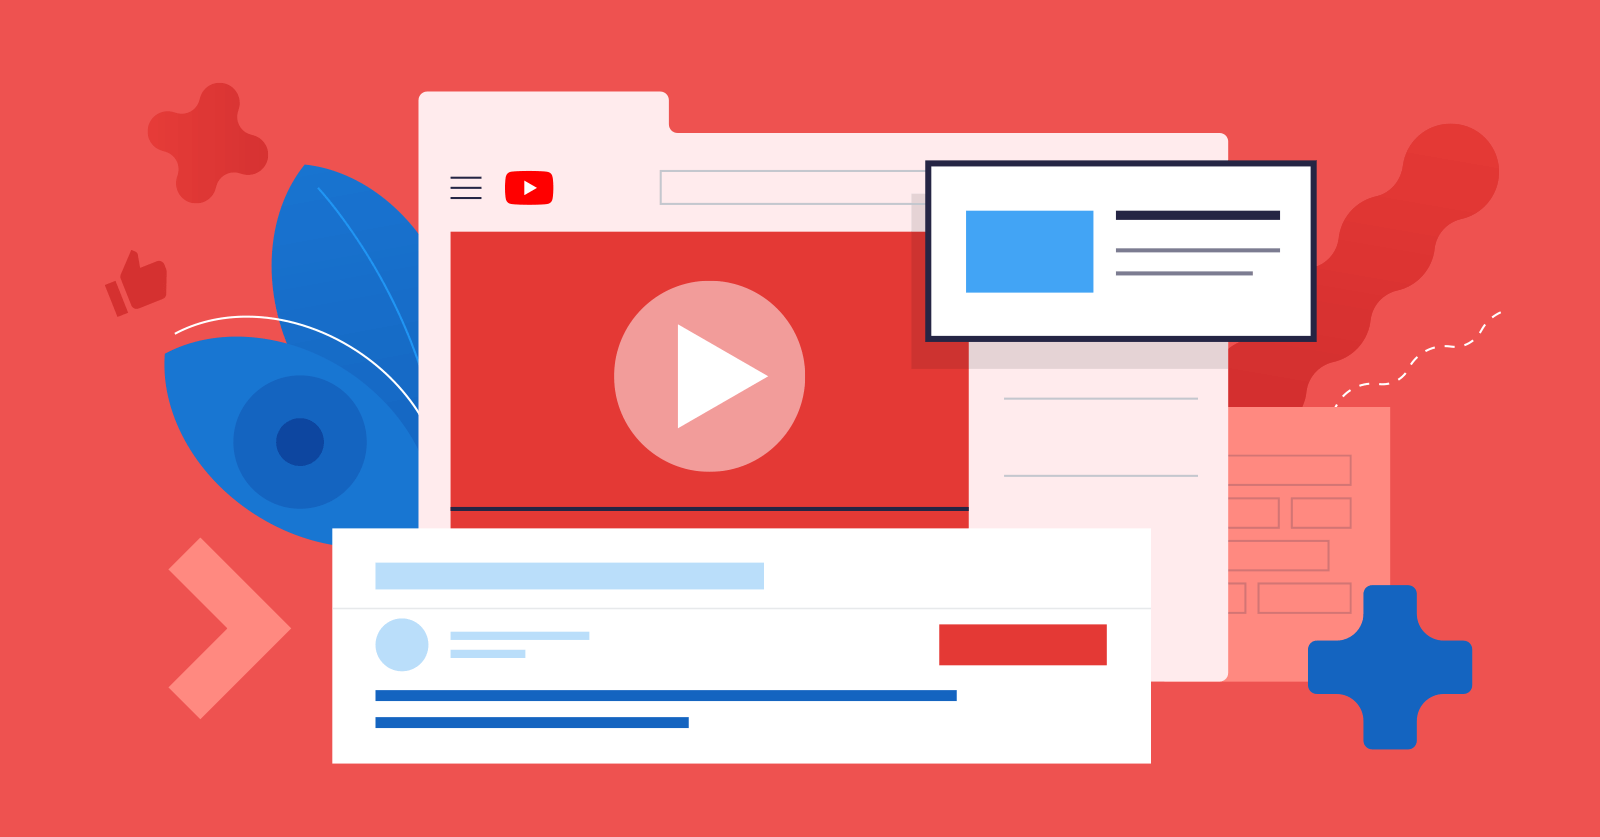 How to increase Youtube subscribers organically in 2021